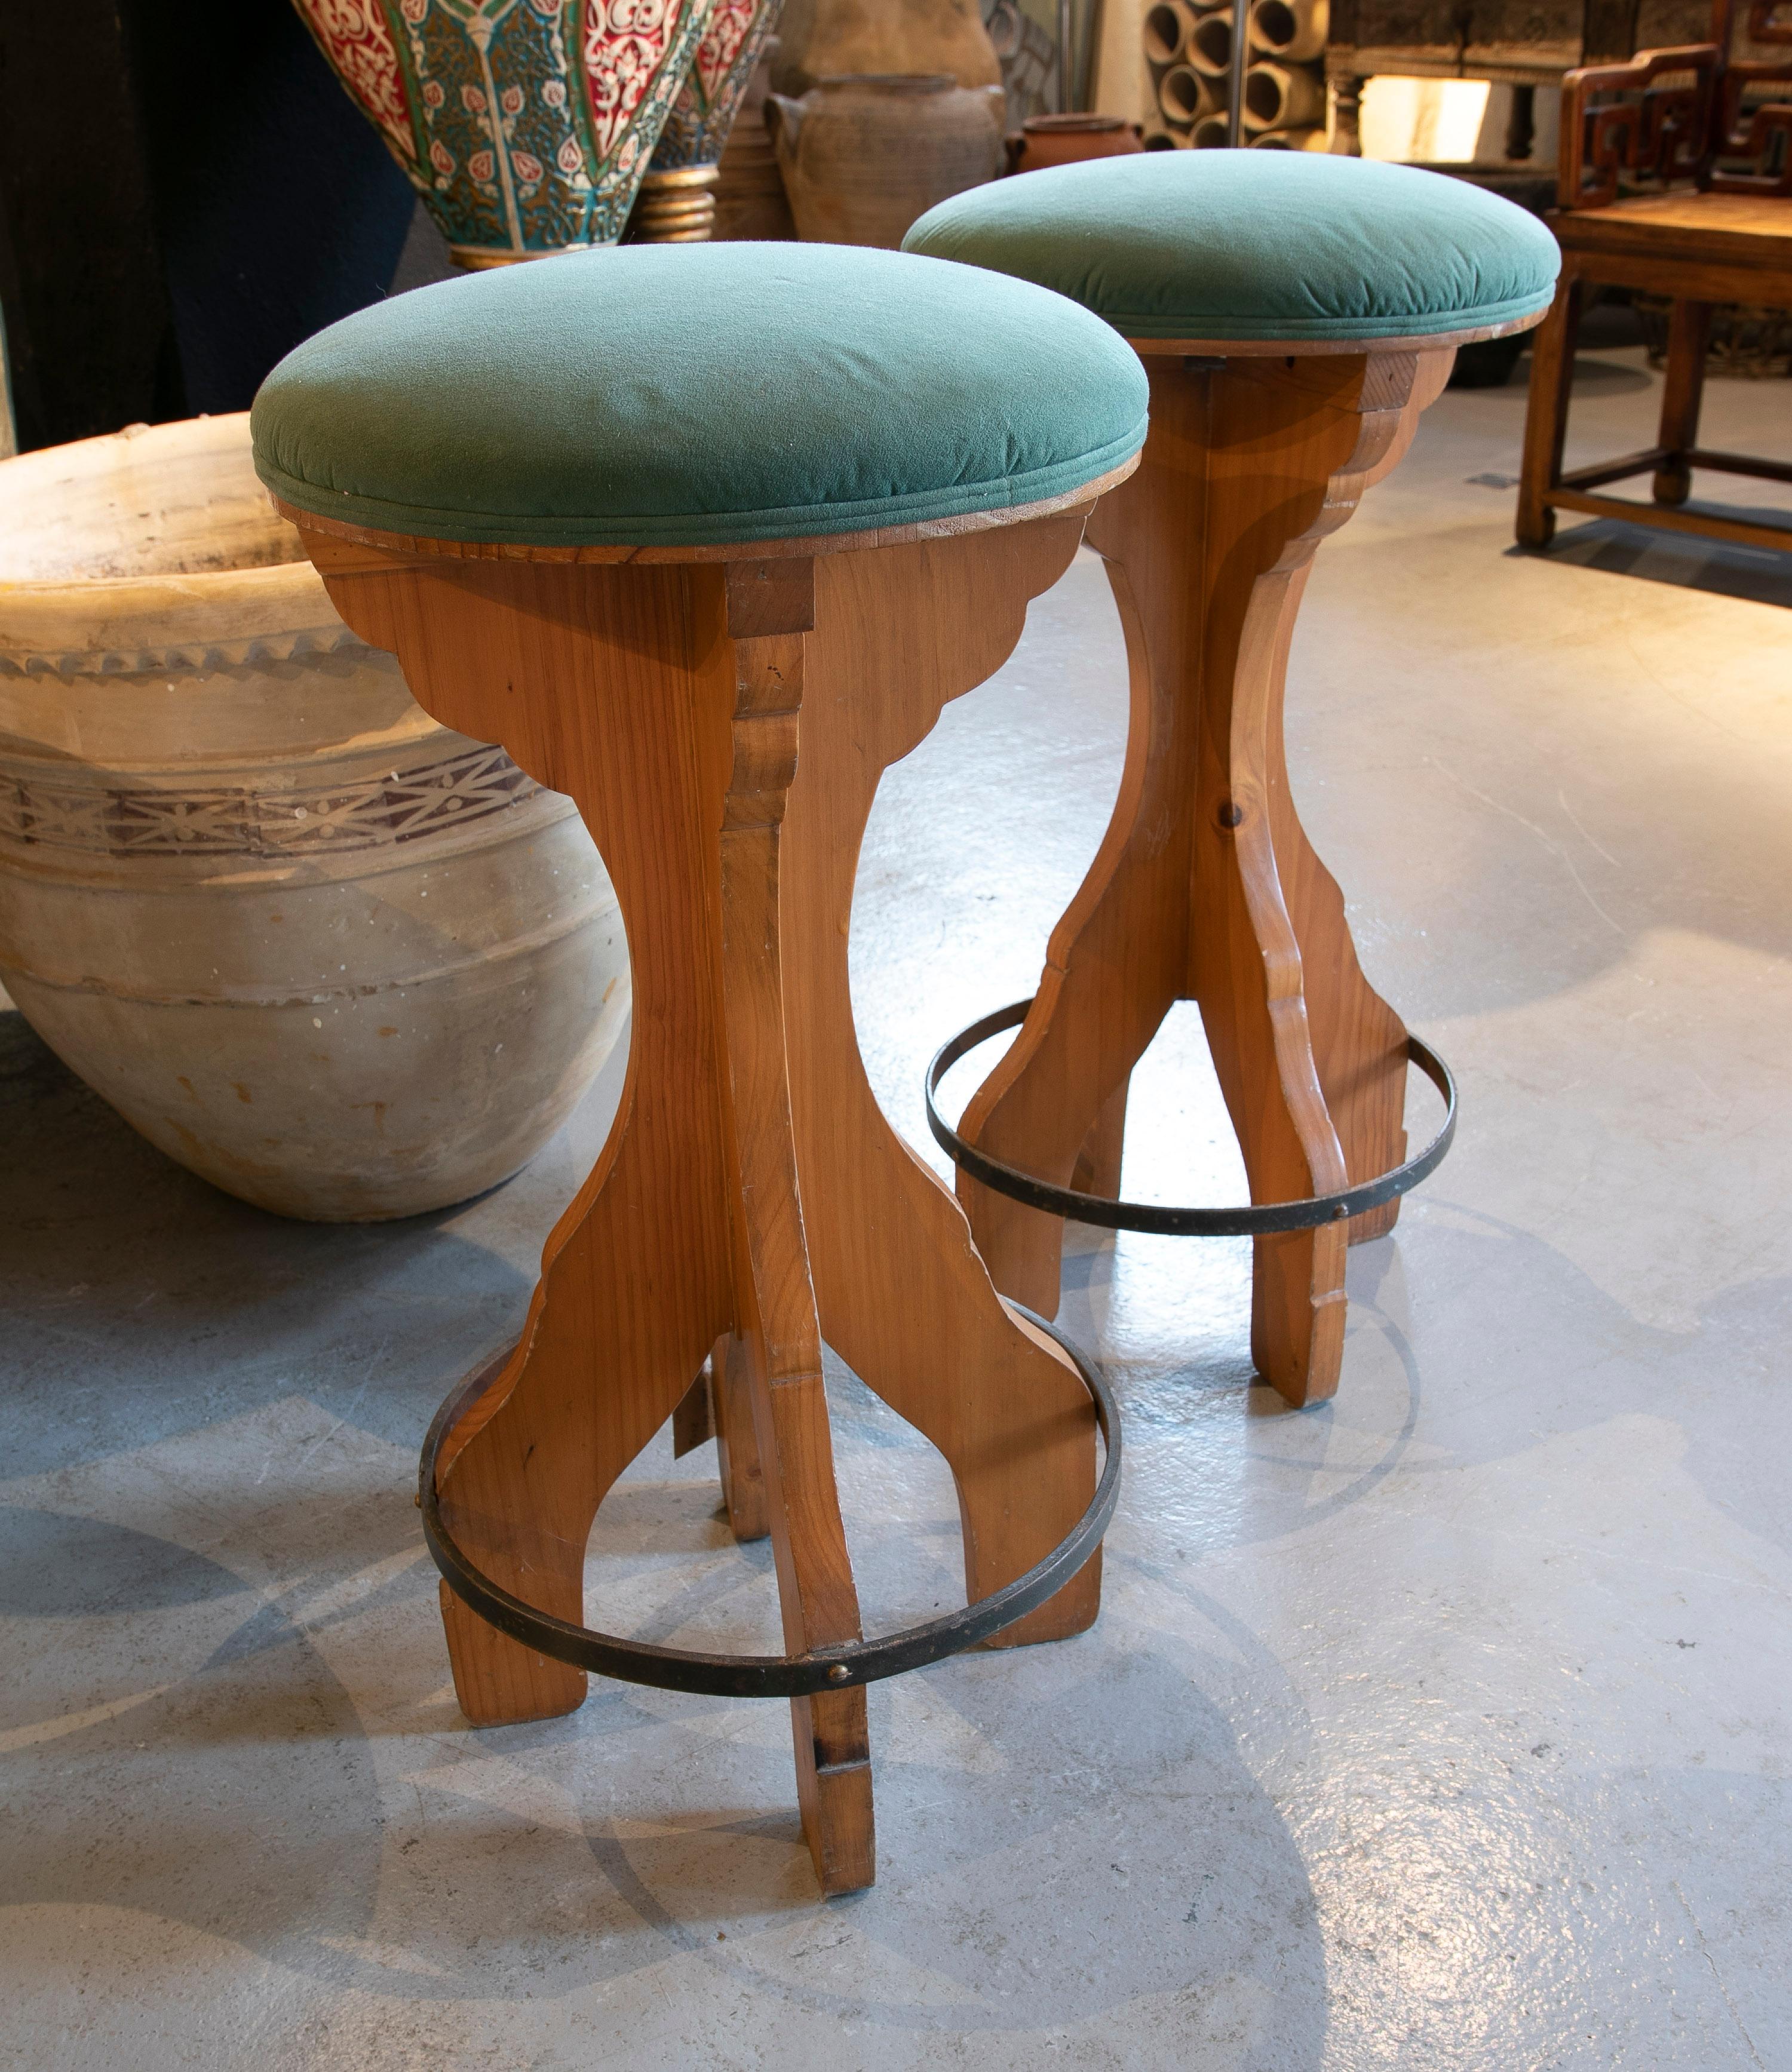 20th Century Pair of 1980s Spanish Wooden Stools with Teal Upholstered Seats For Sale